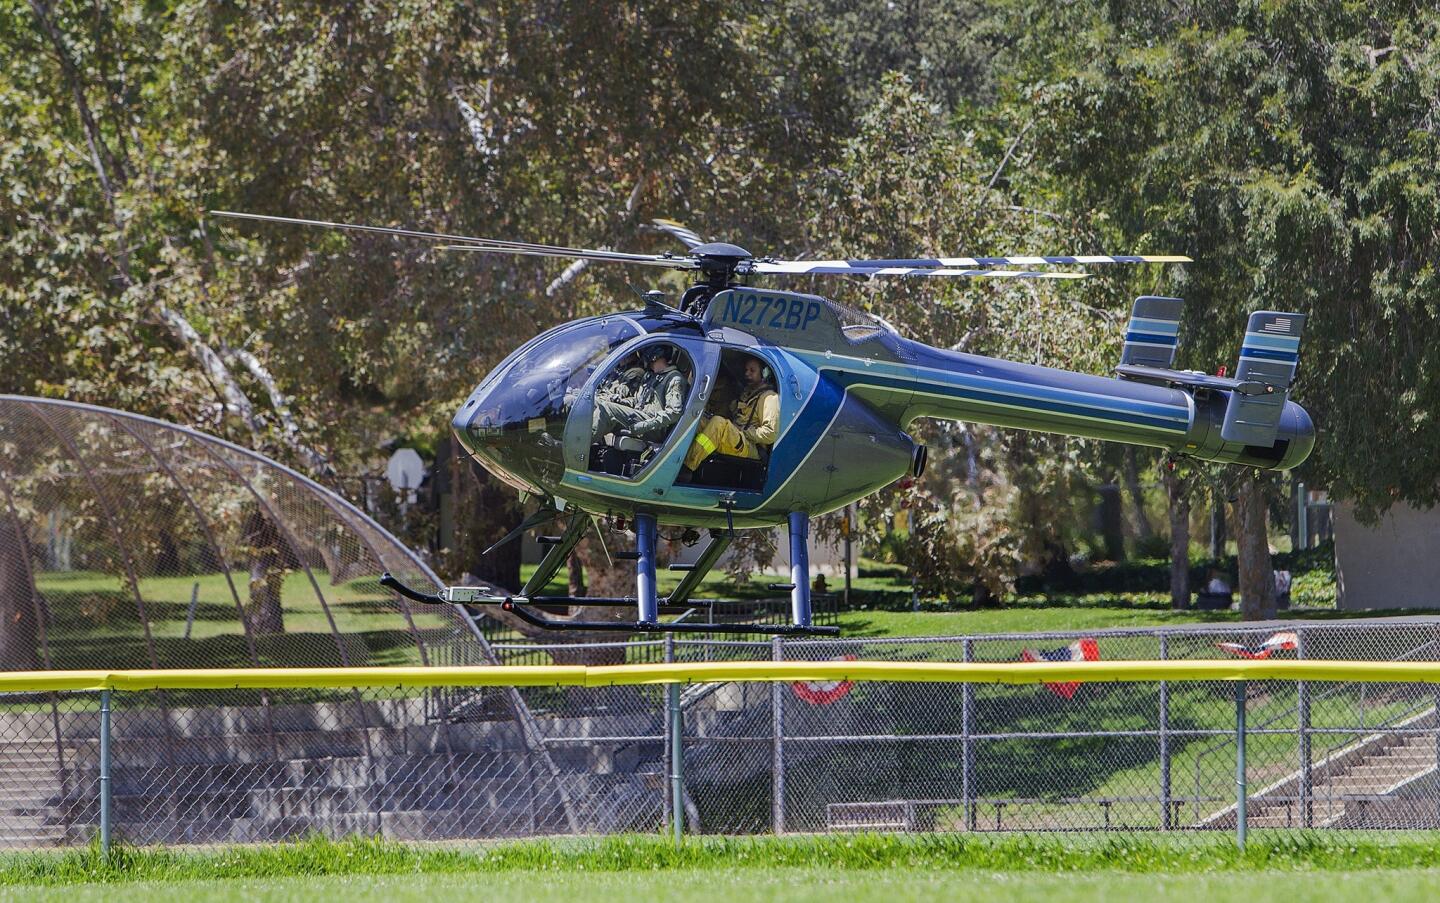 A Glendale police helicopter with two firefighters on board flies over a baseball field en route to the burn area above Brand Park to investigate the suspicious origin of a 150-acre wildfire.